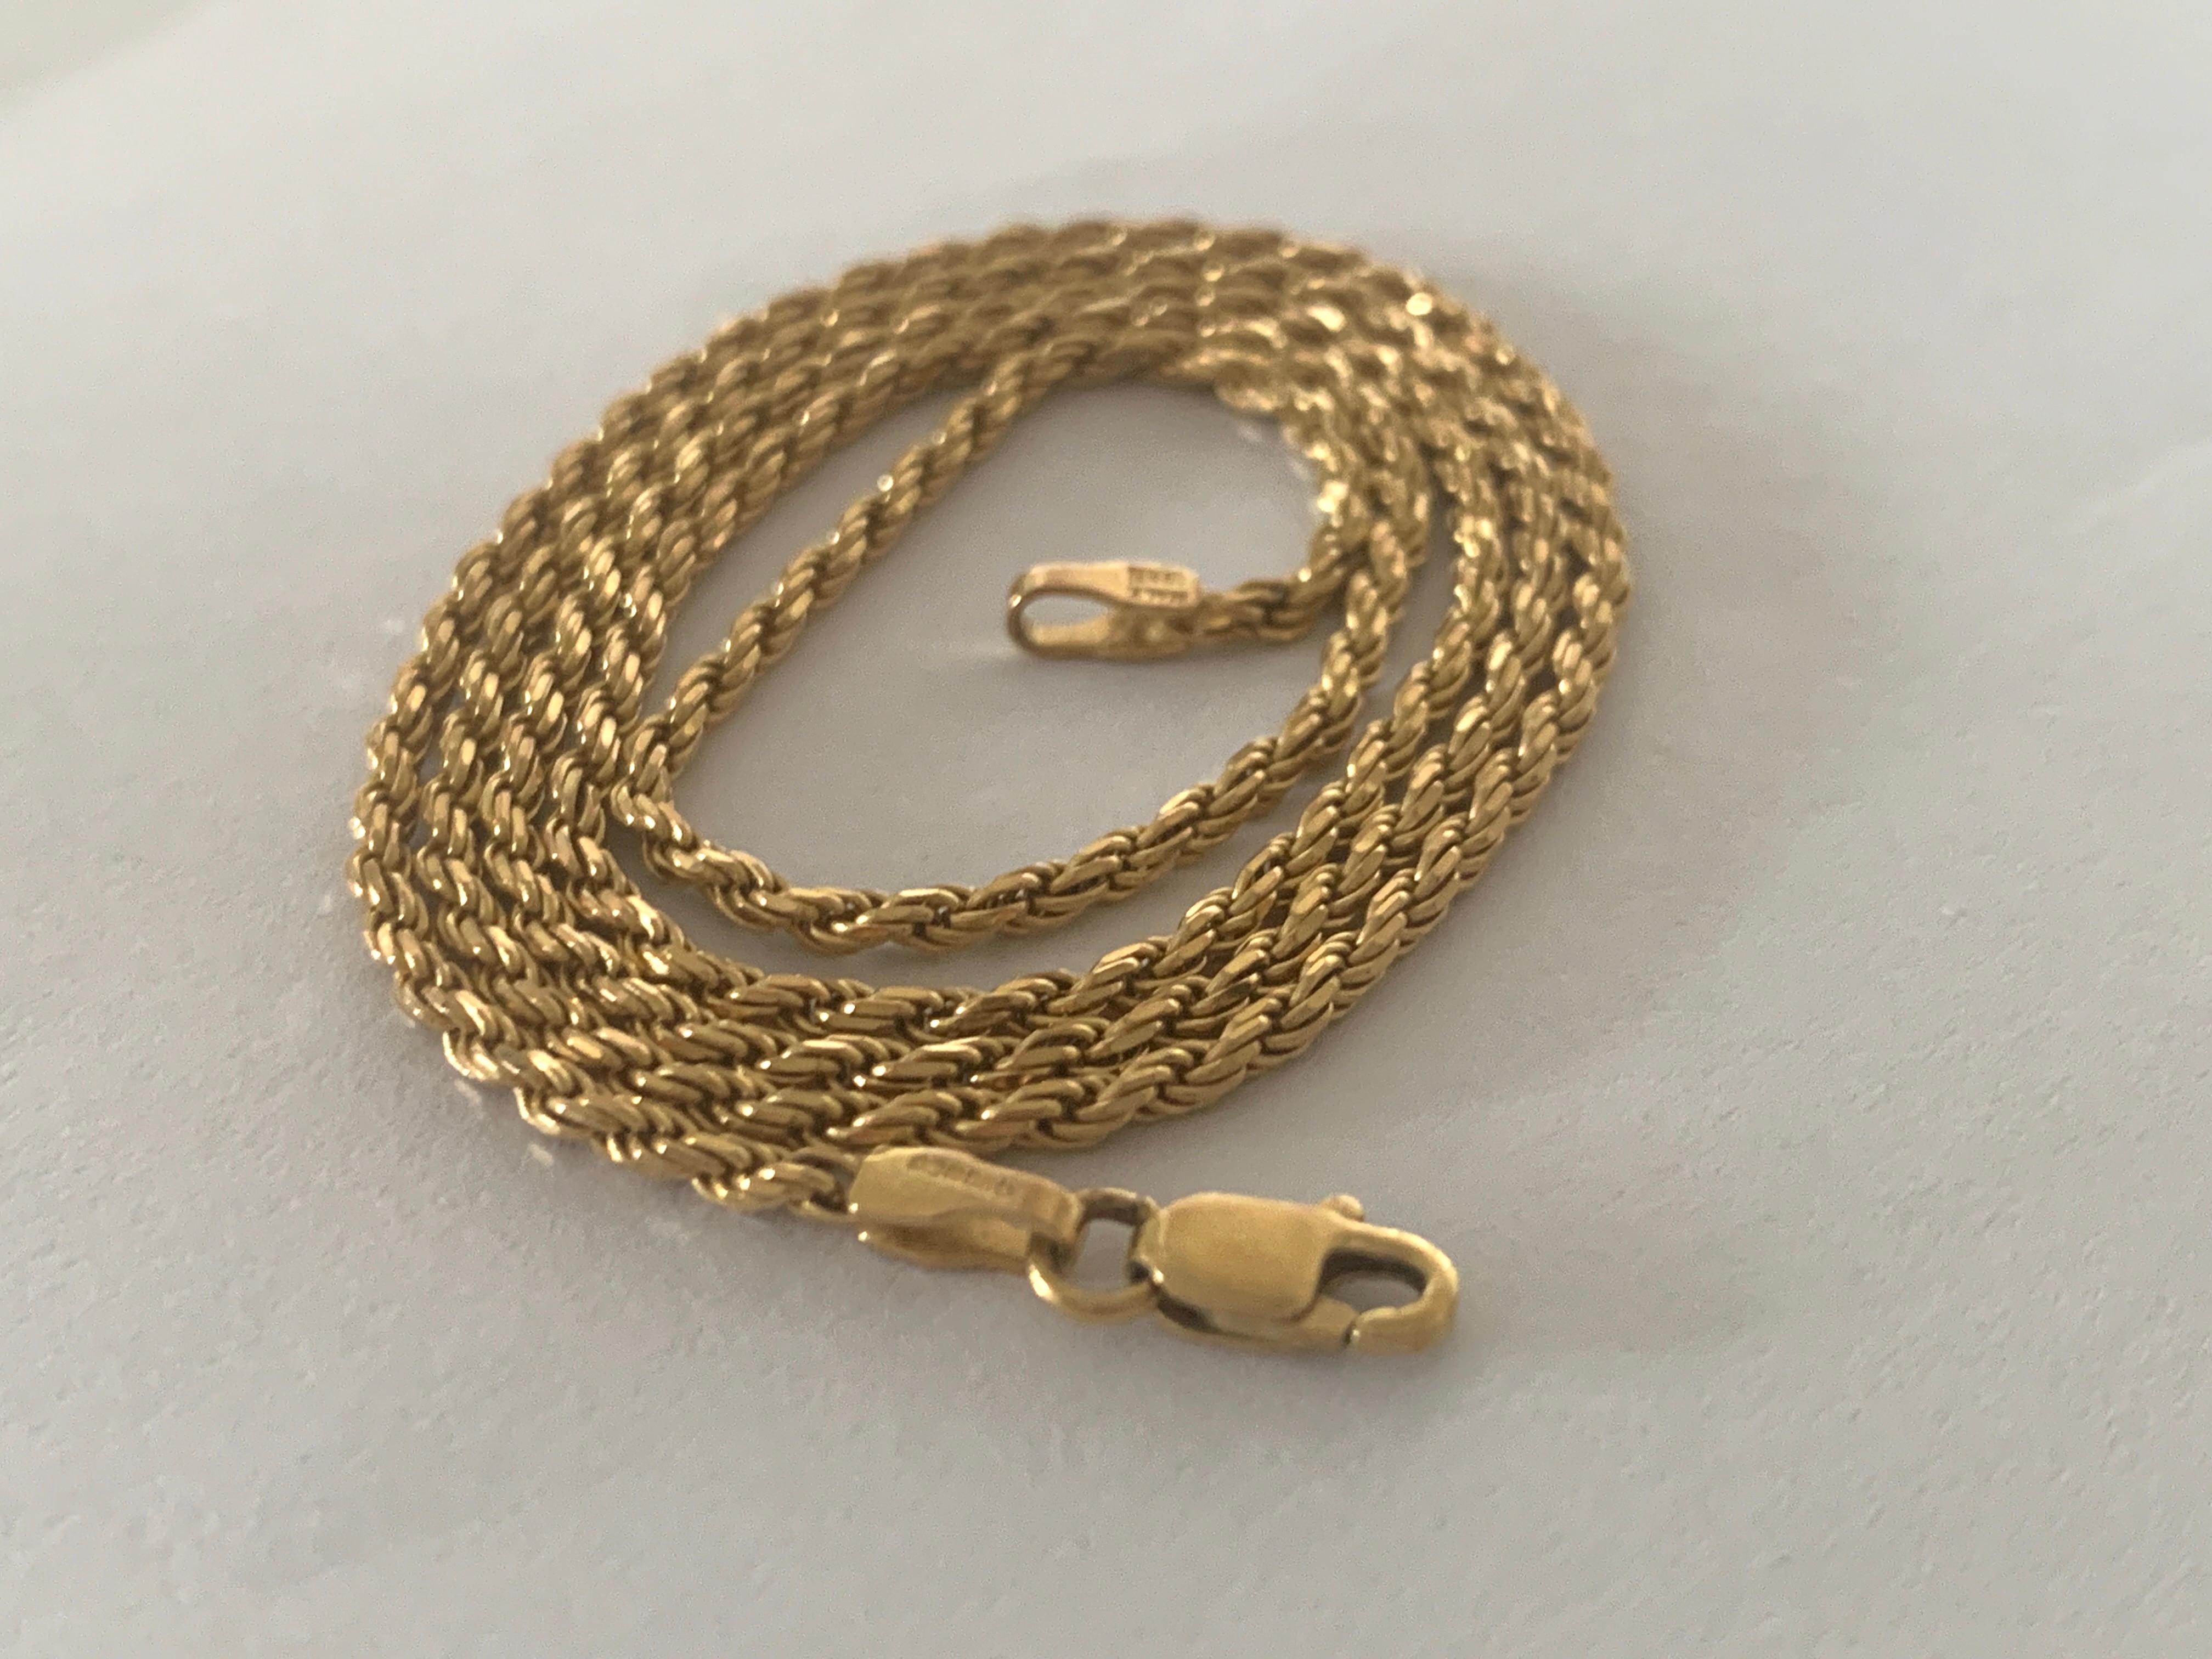 9ct 375 Gold Rope Chain
Length 20.4